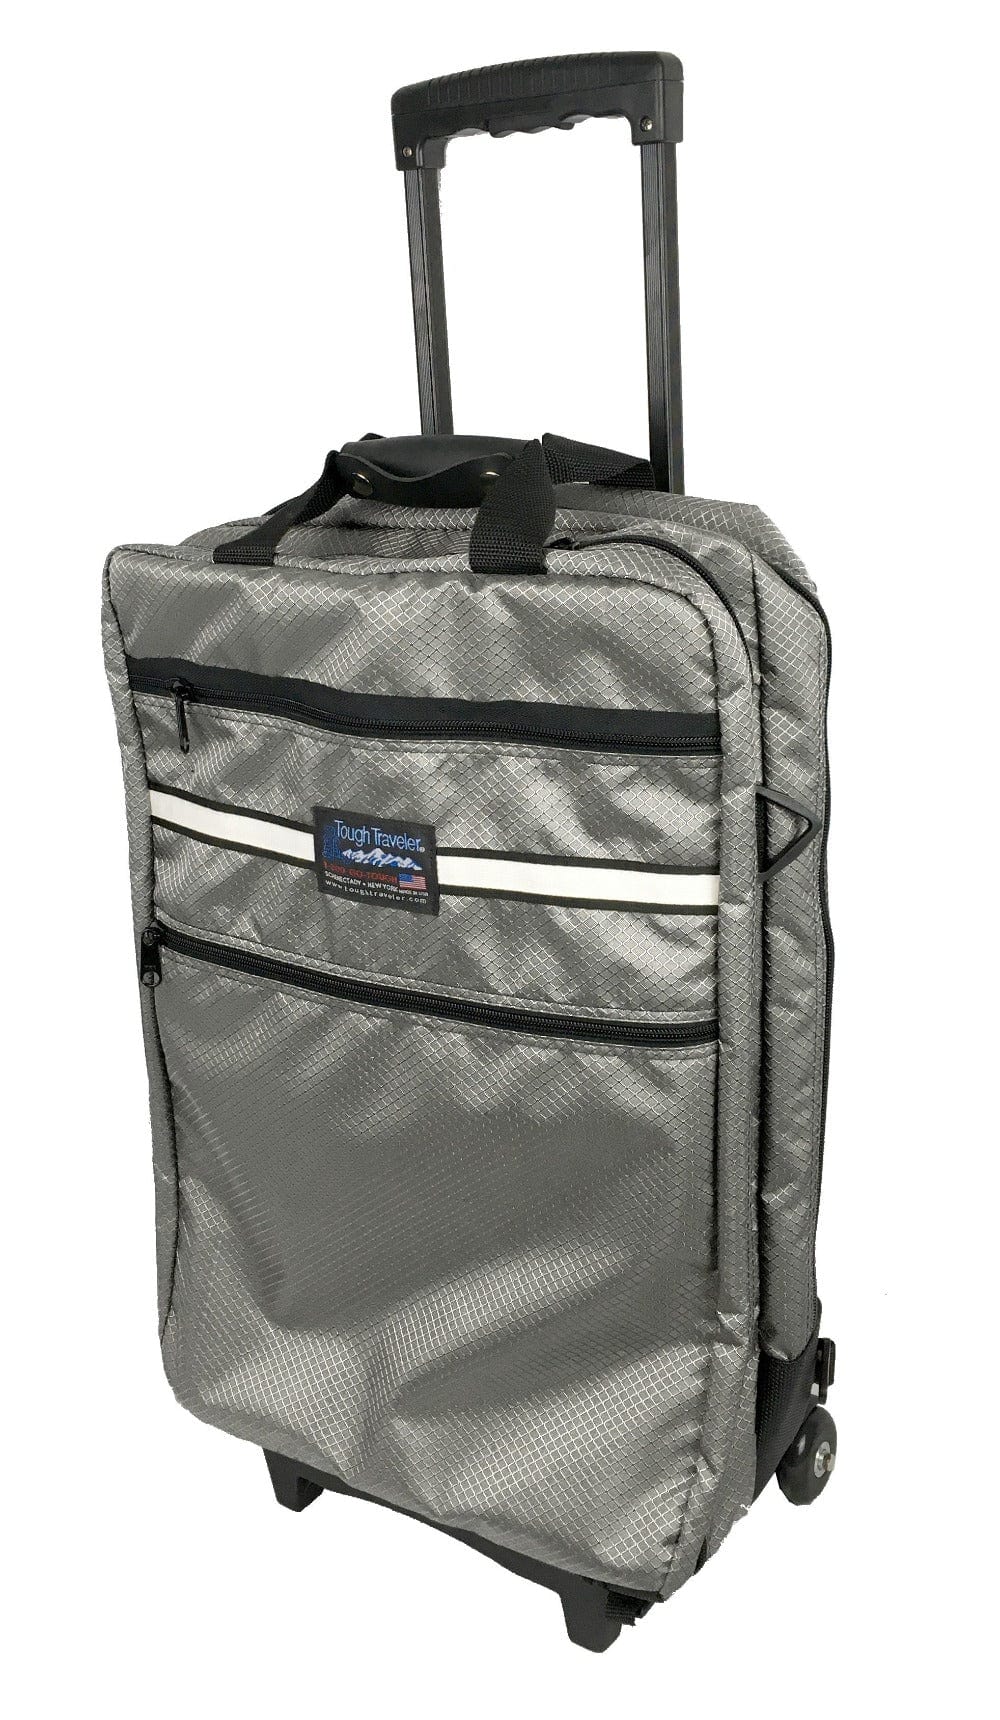 Tough Traveler | Made in USA | CYGNET Fully-Convertible Rolling Carry-On